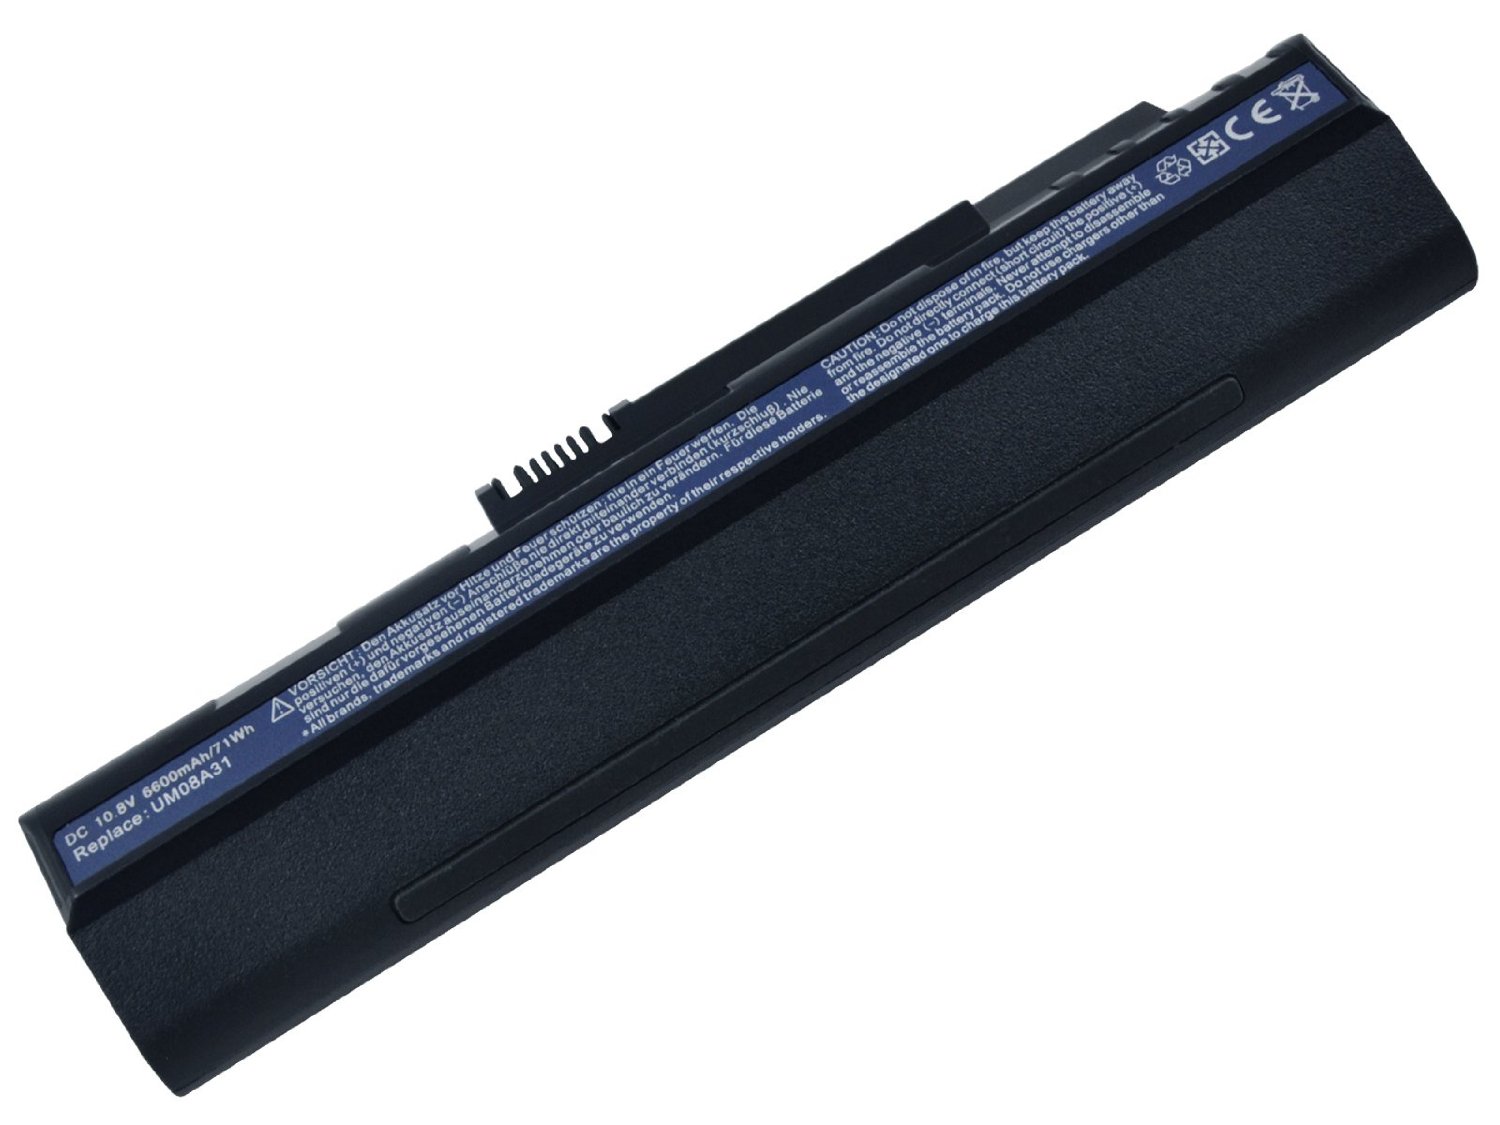 Acer Apsire one ZG5 6 Cell: Laptop Battery 6-cell for Acer Aspire One ZG5 Series